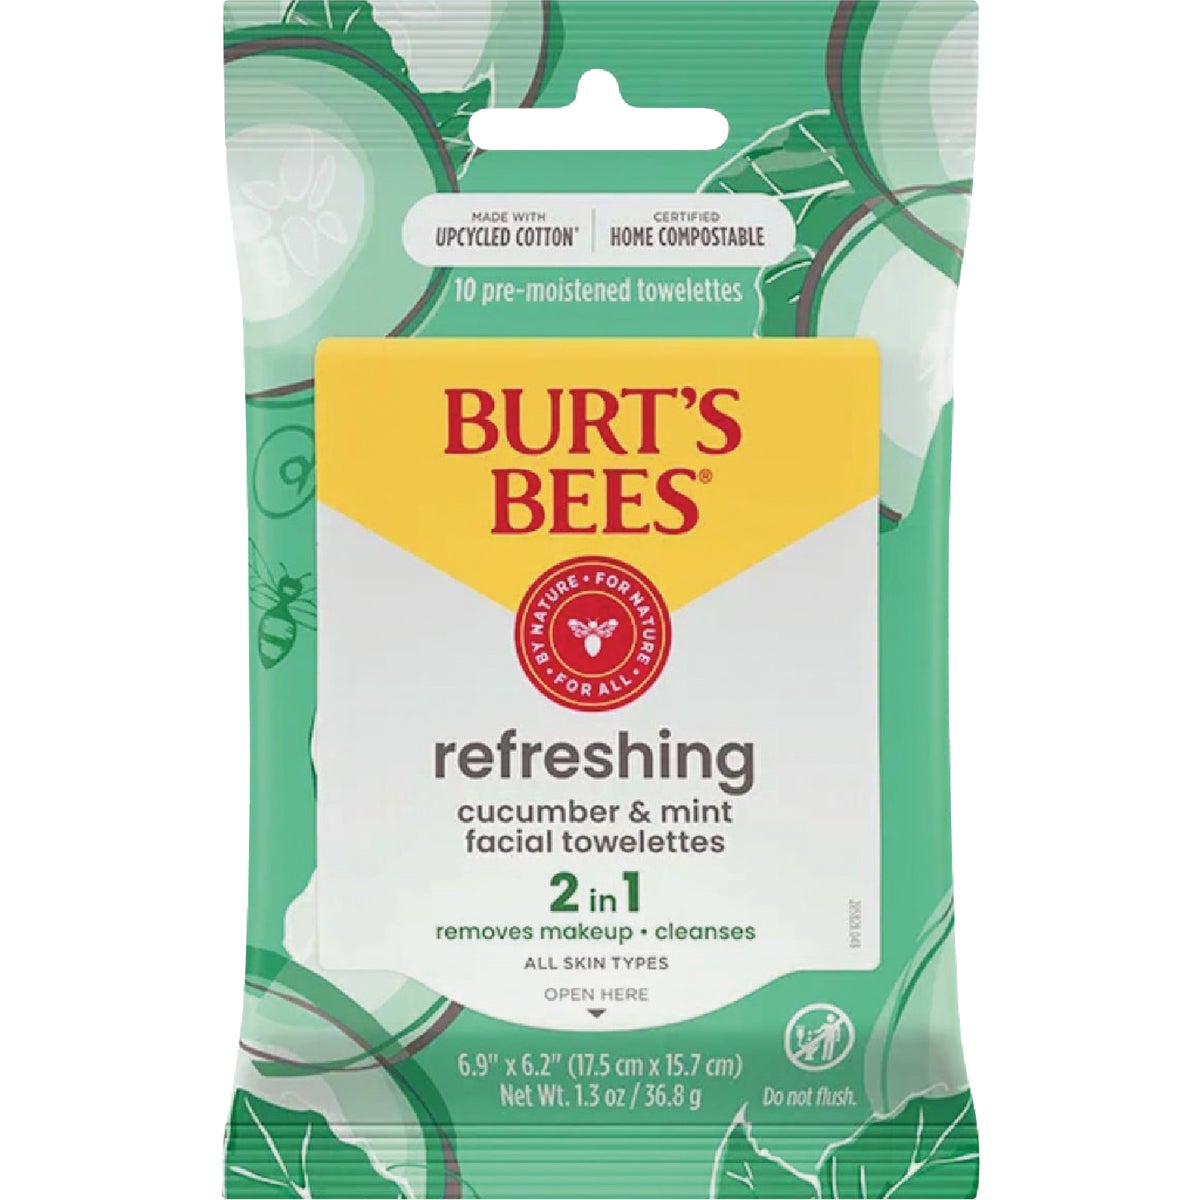 Burt's Bees Refreshing Cucumber Mint Facial Towelettes (10-Count)